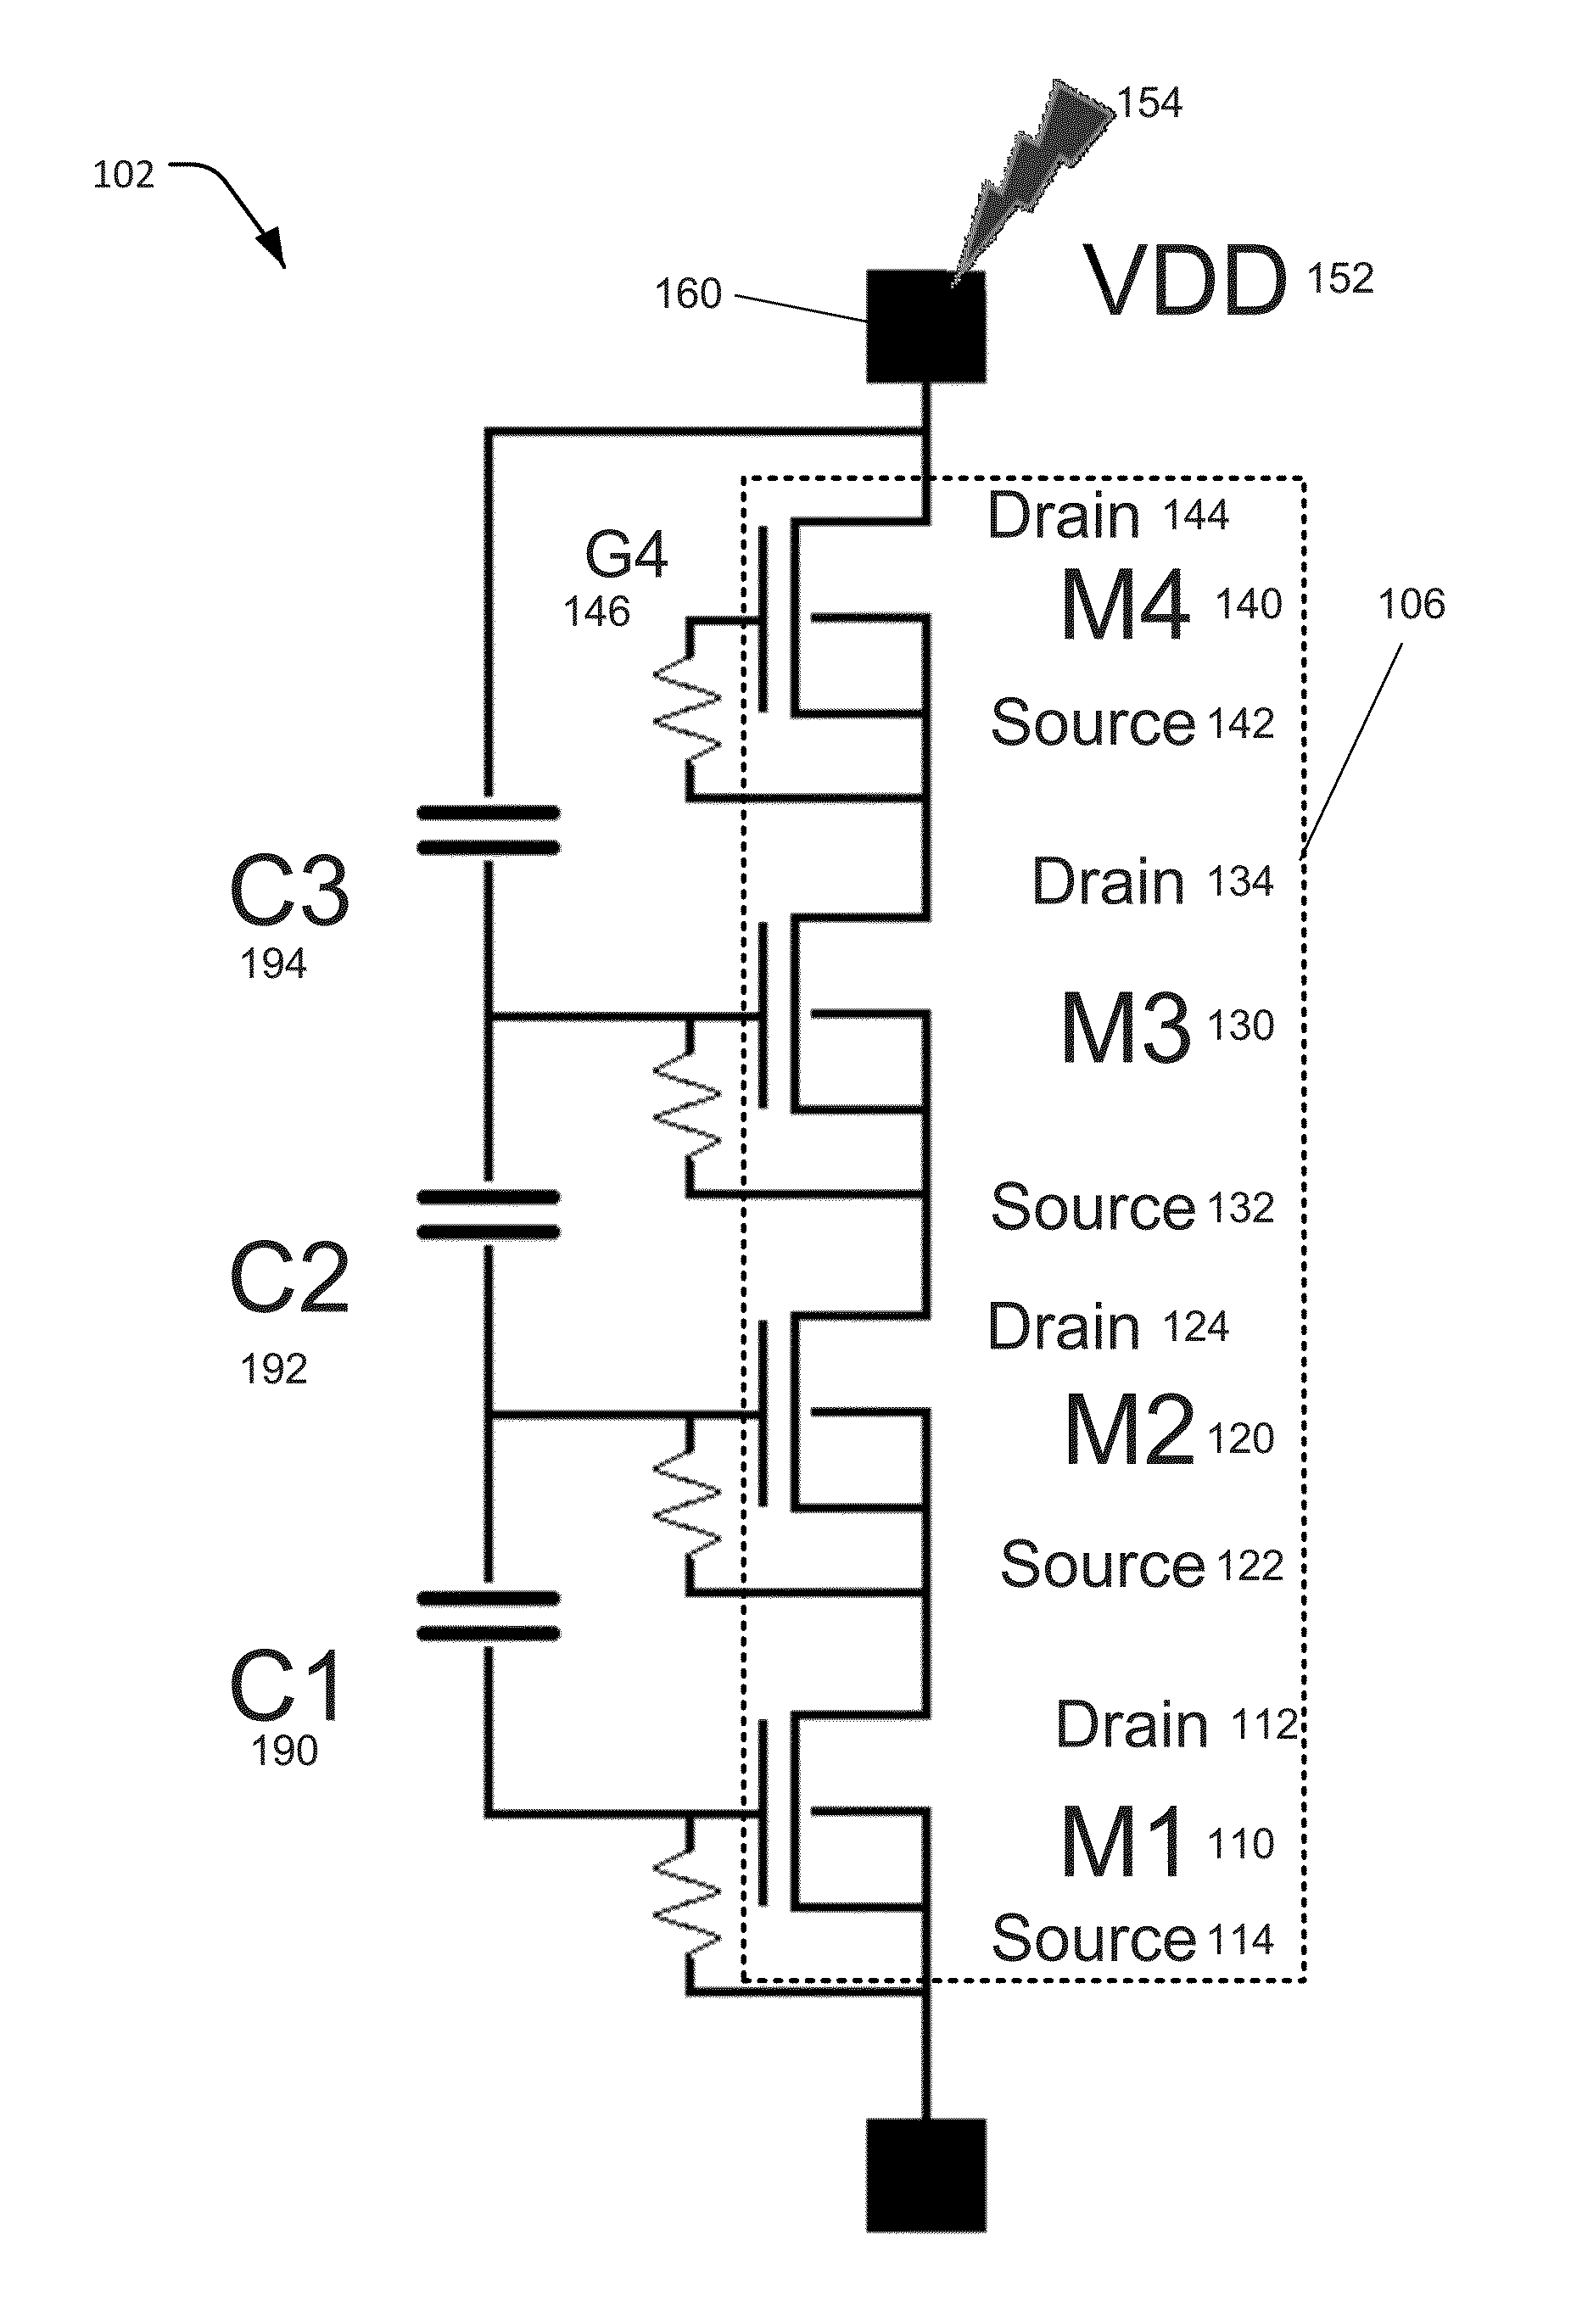 Rc-stacked mosfet circuit for high voltage (HV) electrostatic discharge (ESD) protection